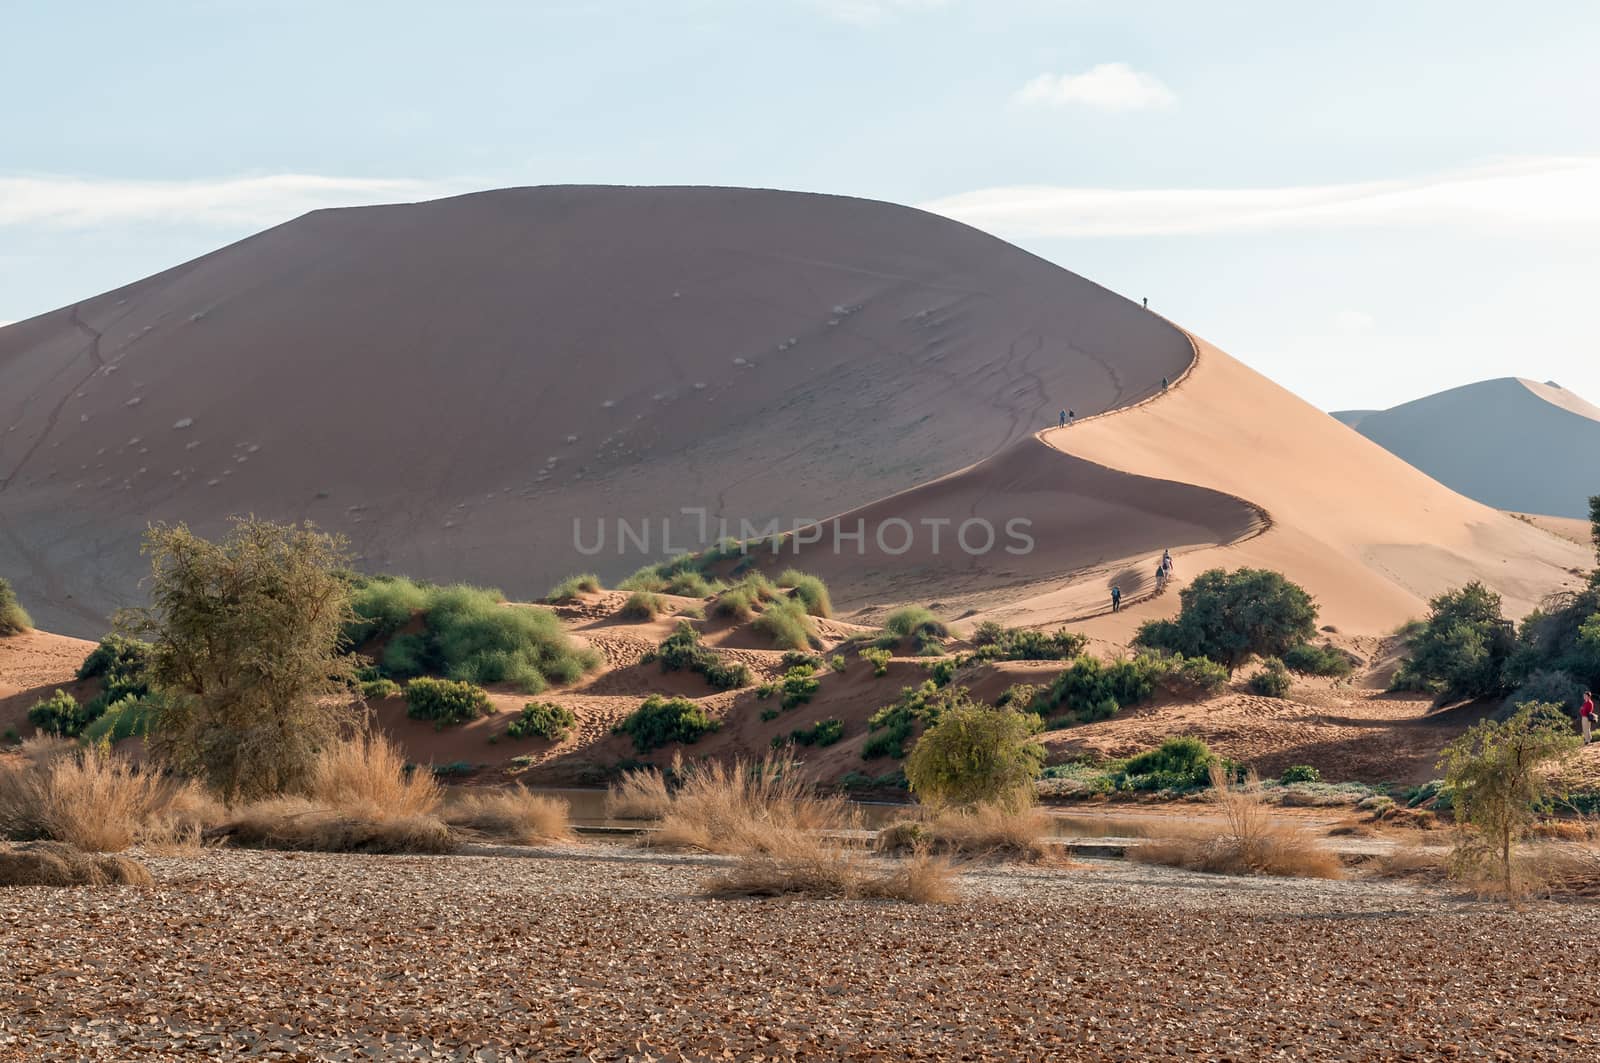 View of the sickle shaped sand dune next to Sossusvlei. Tourists are visible on the dune